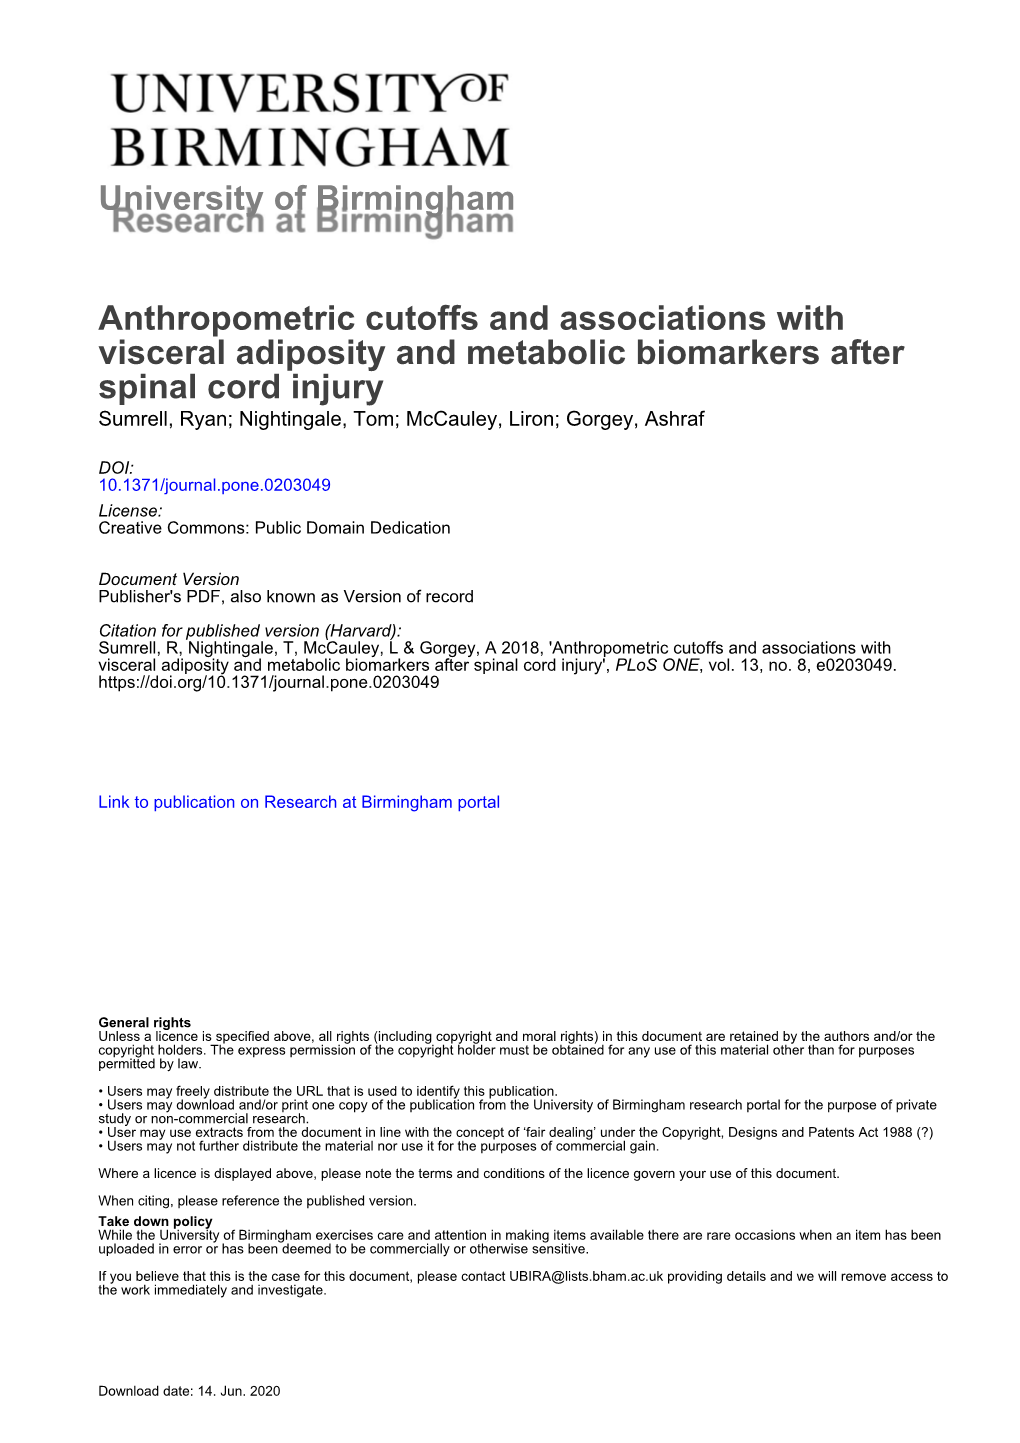 Anthropometric Cutoffs and Associations with Visceral Adiposity